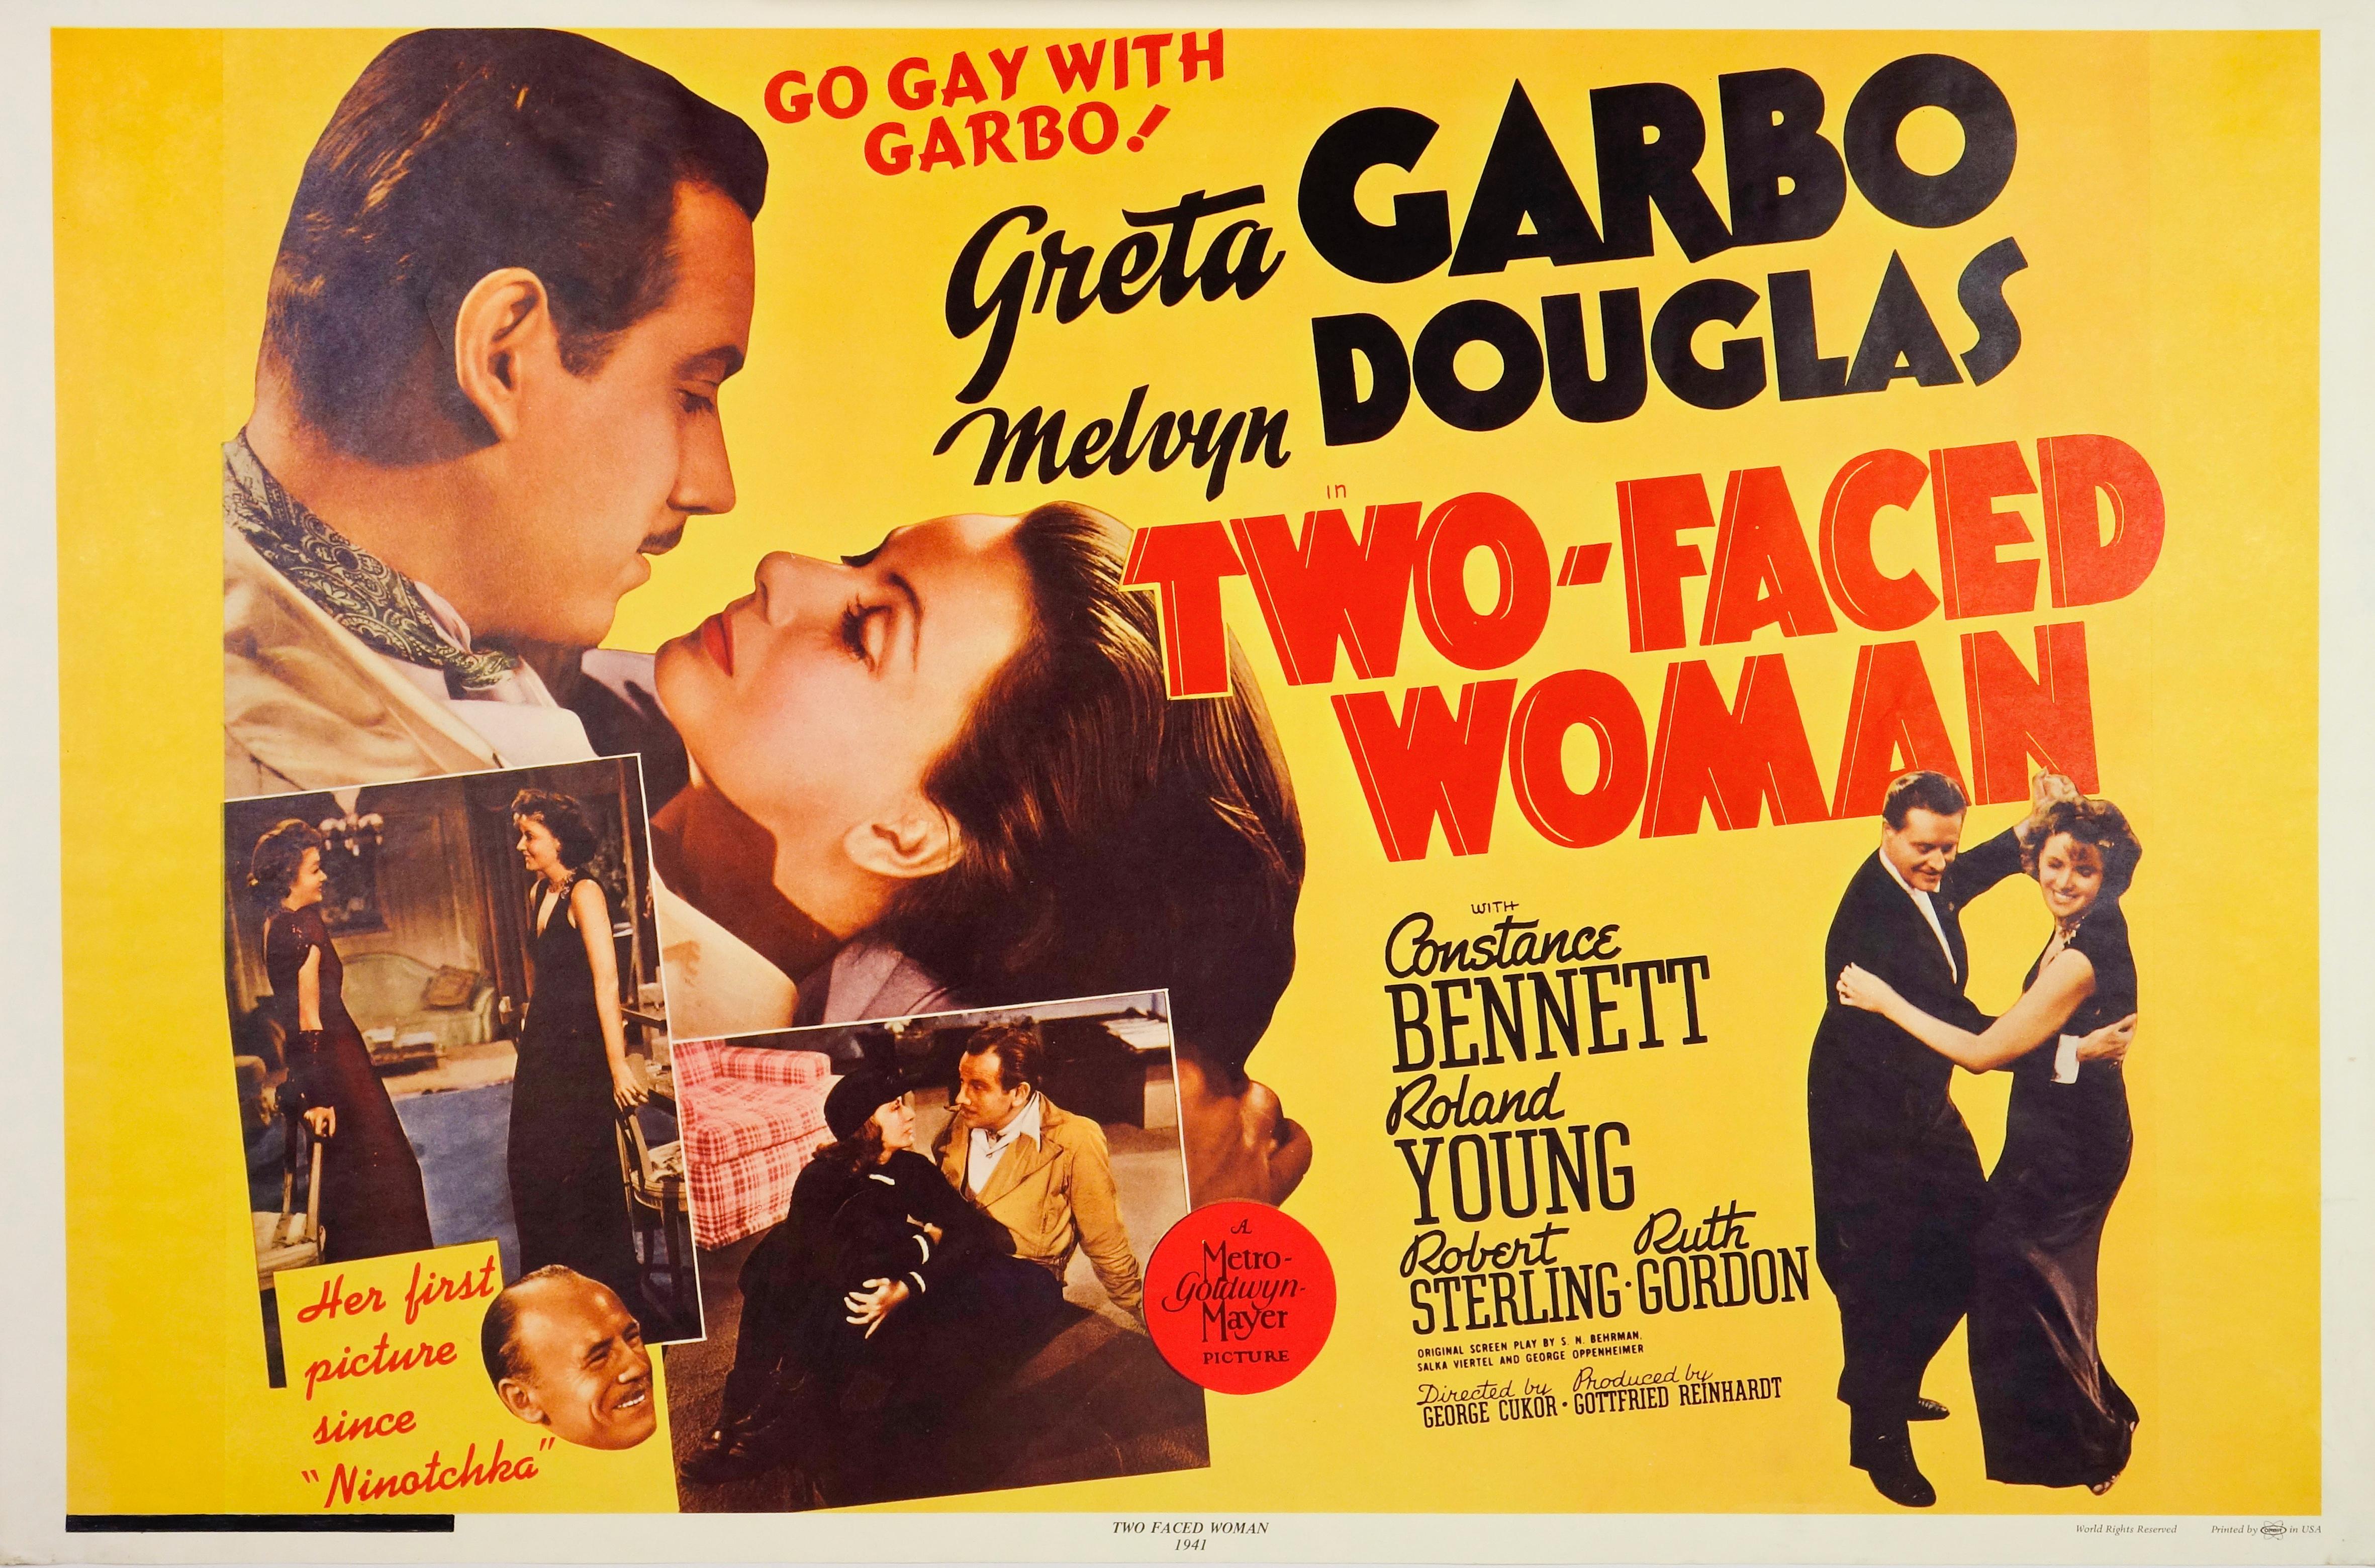 Unknown Portrait Print - Greta Garbo "Two-Faced Woman" Movie Poster "Go Gay with Garbo!"